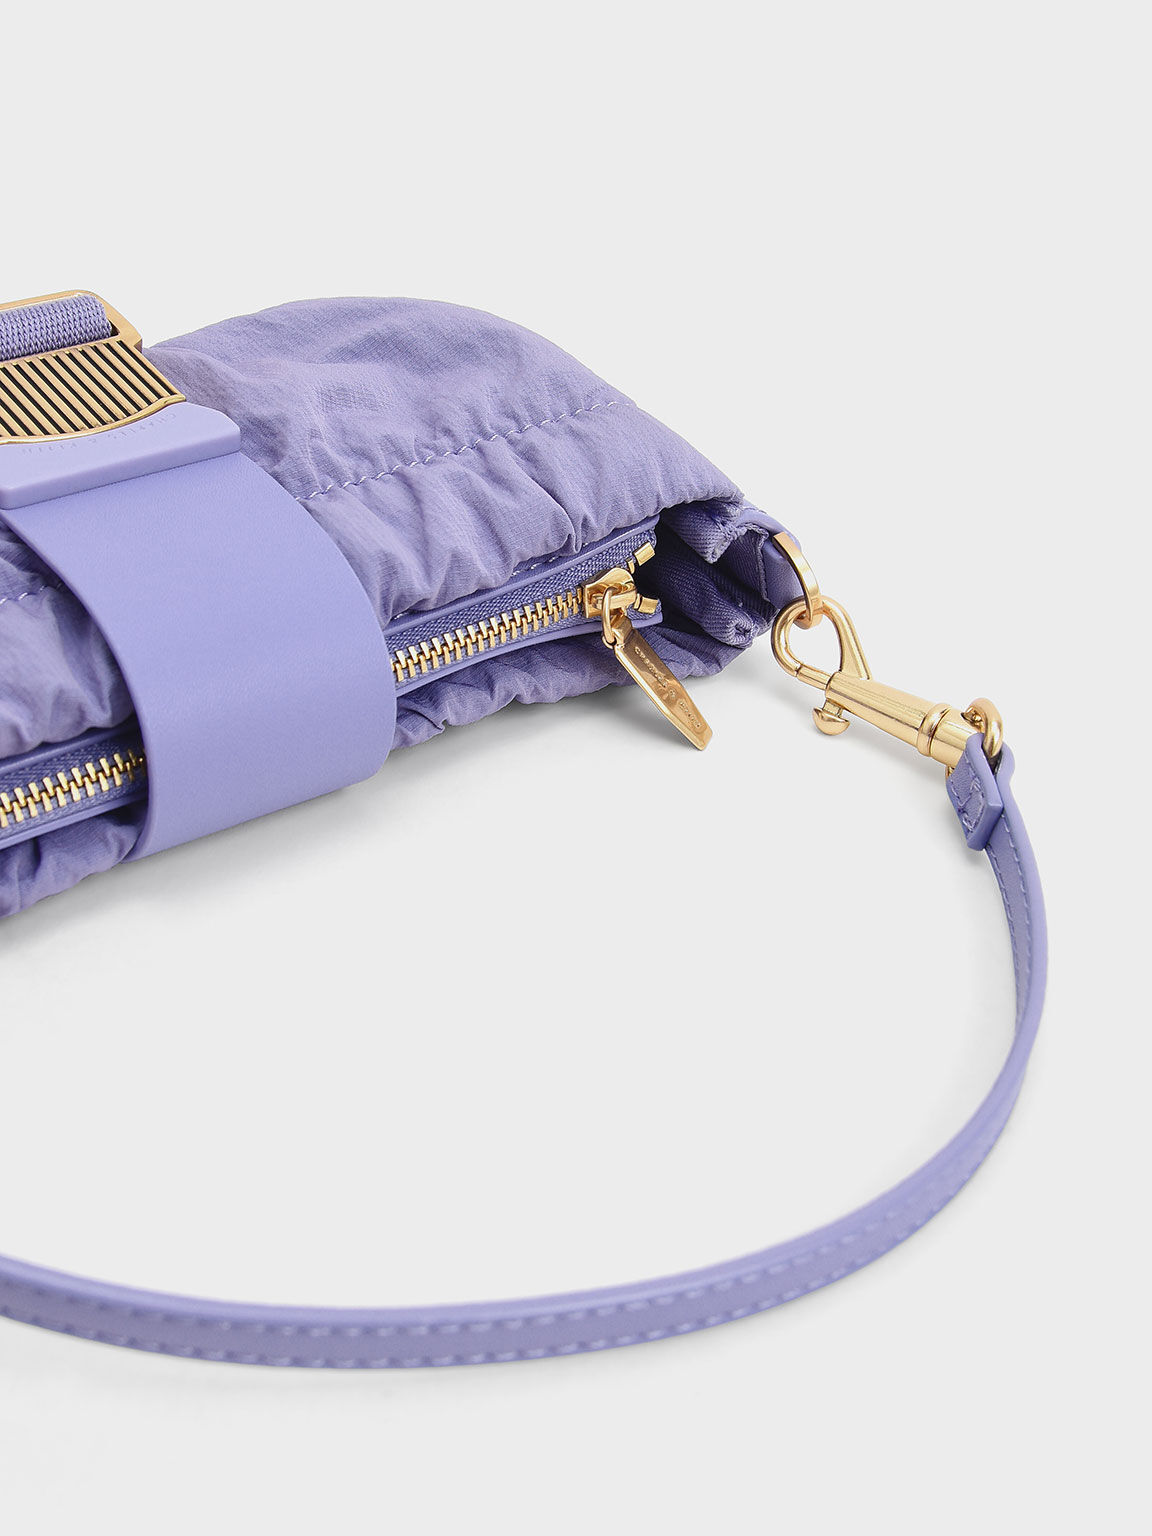 Aspen Ruched Phone Pouch, Lilac, hi-res